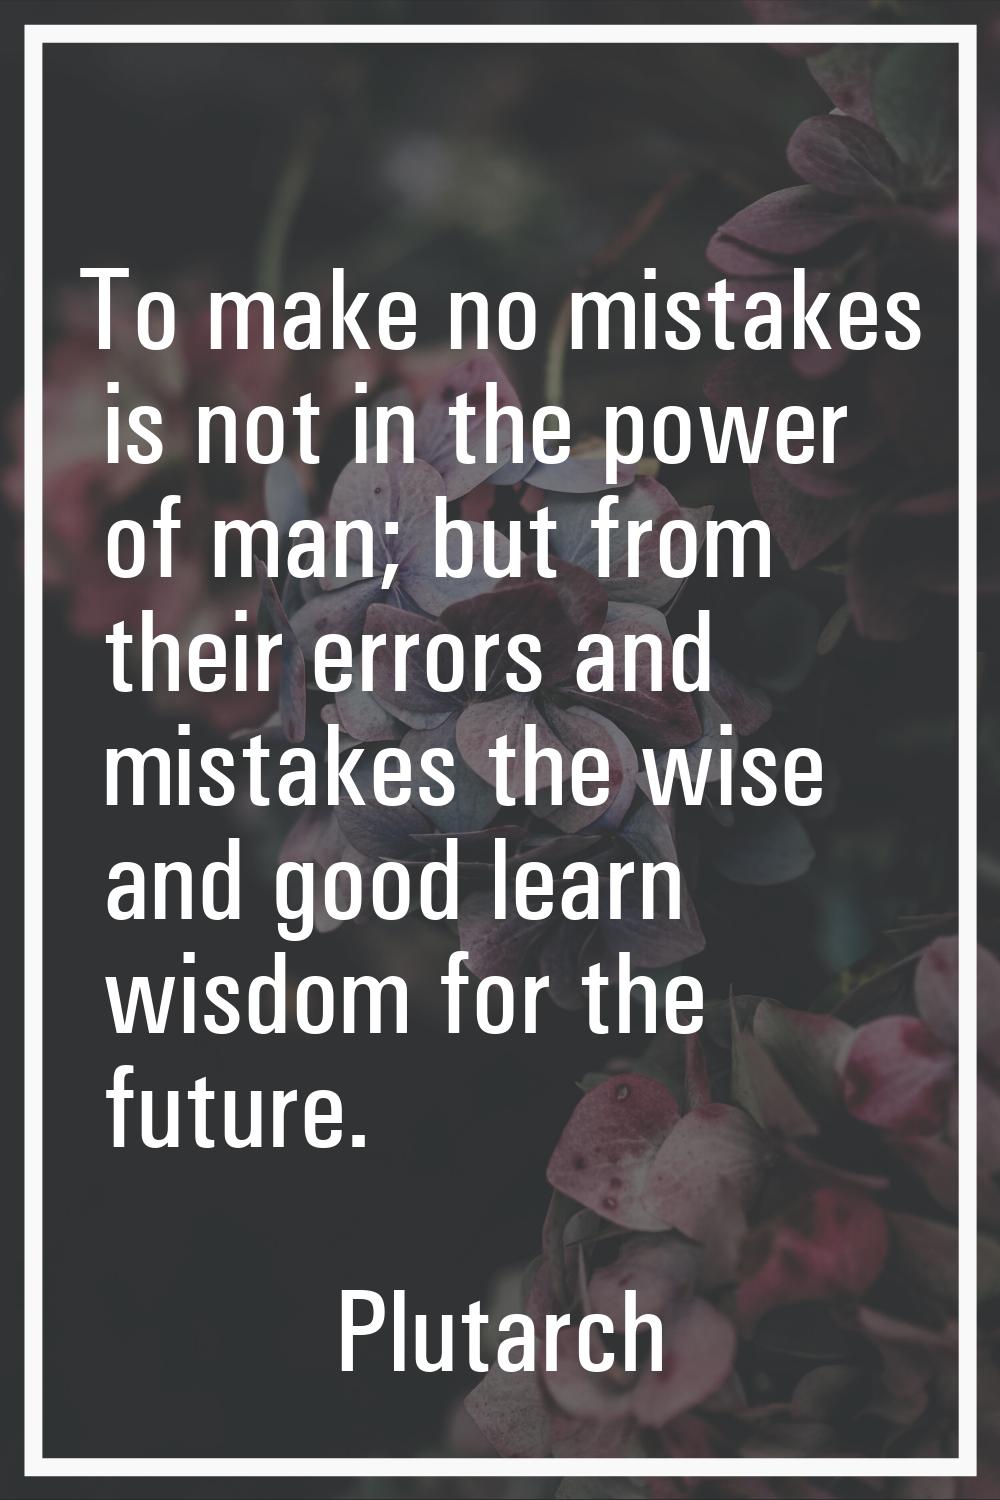 To make no mistakes is not in the power of man; but from their errors and mistakes the wise and goo